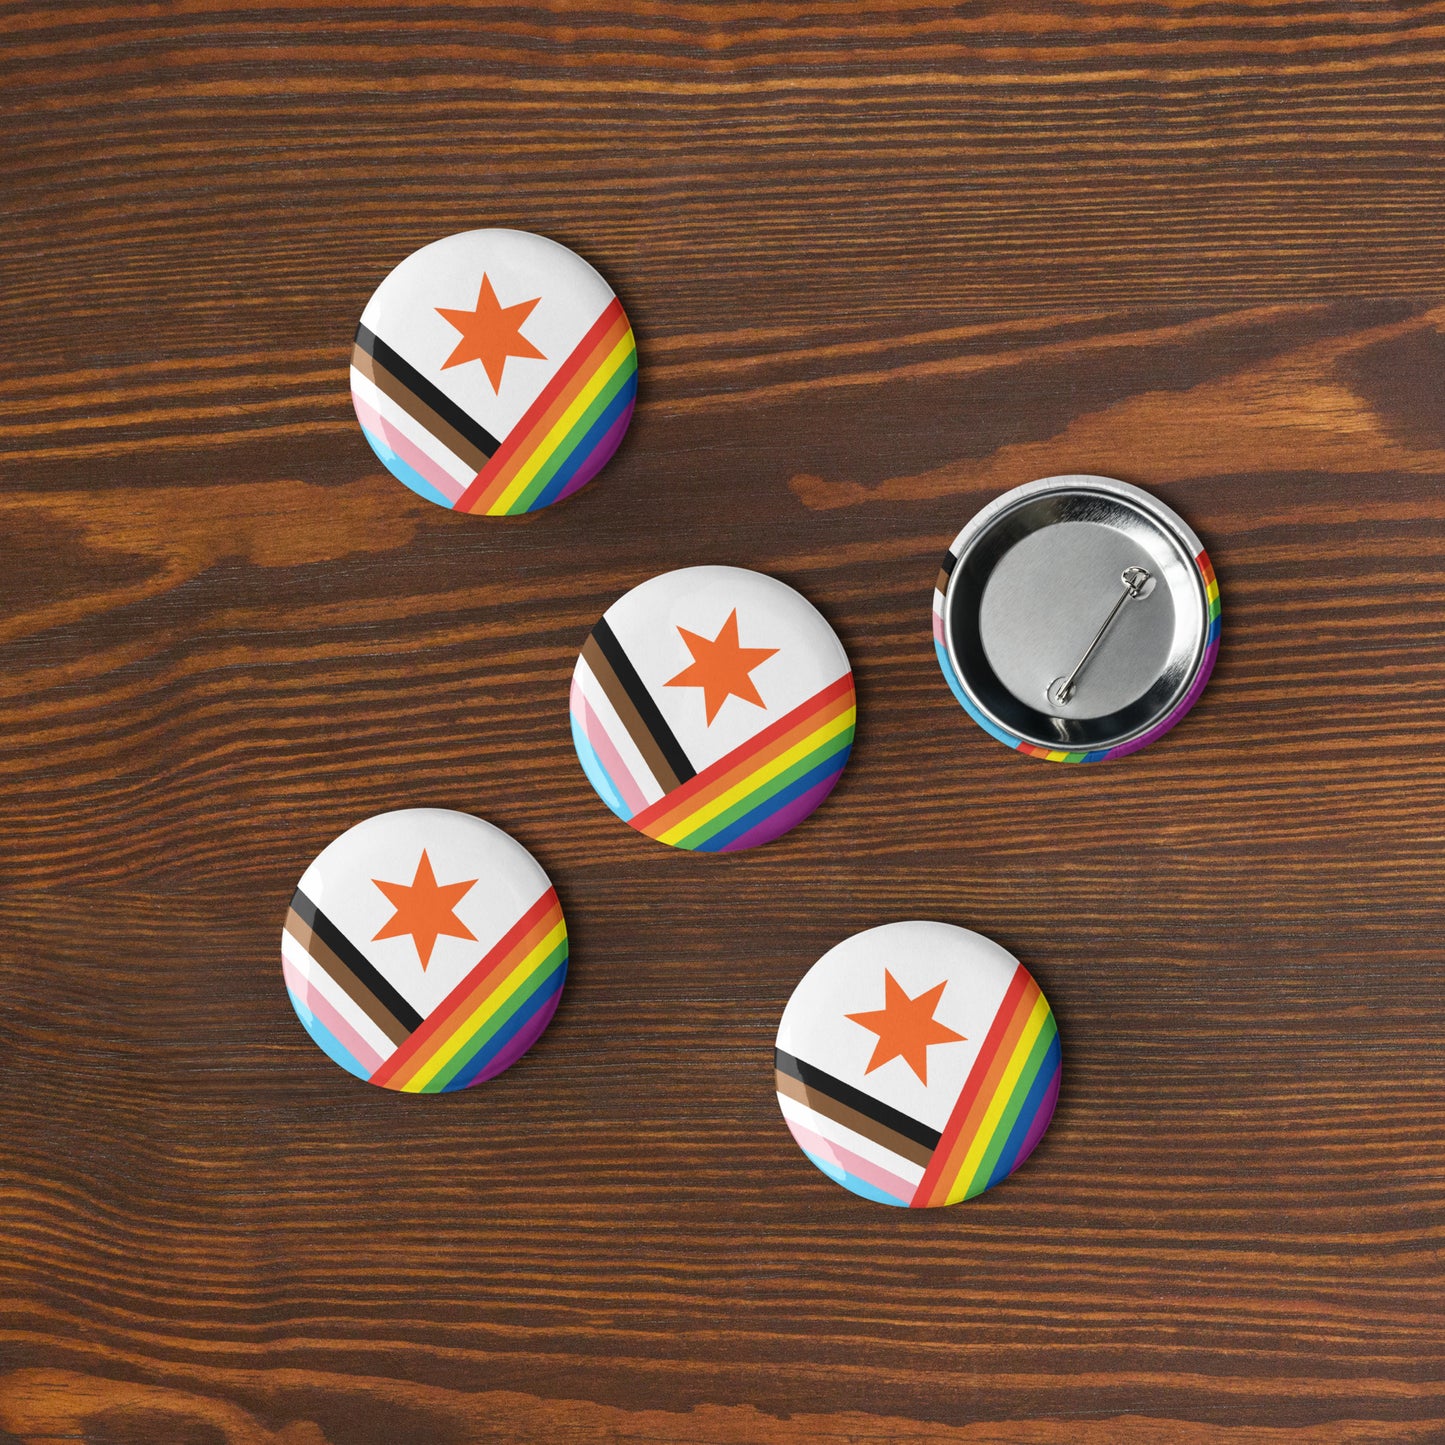 Five Pride version Syracuse, NY city flag button pins lying flat on a wooden surface